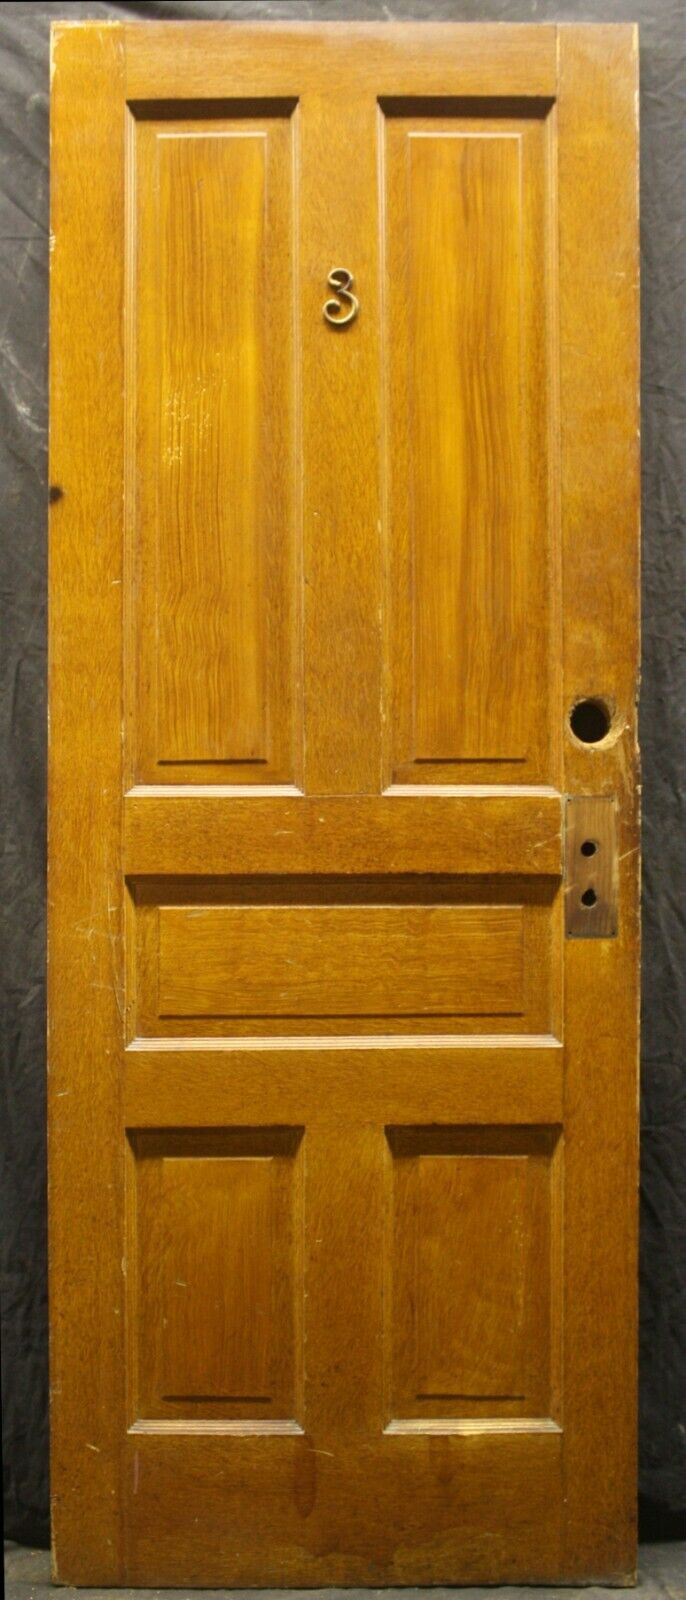 3 available 29.5"x79" Antique Vintage Old Reclaimed Salvaged SOLID Wood Wooden Interior Doors 5 Panels